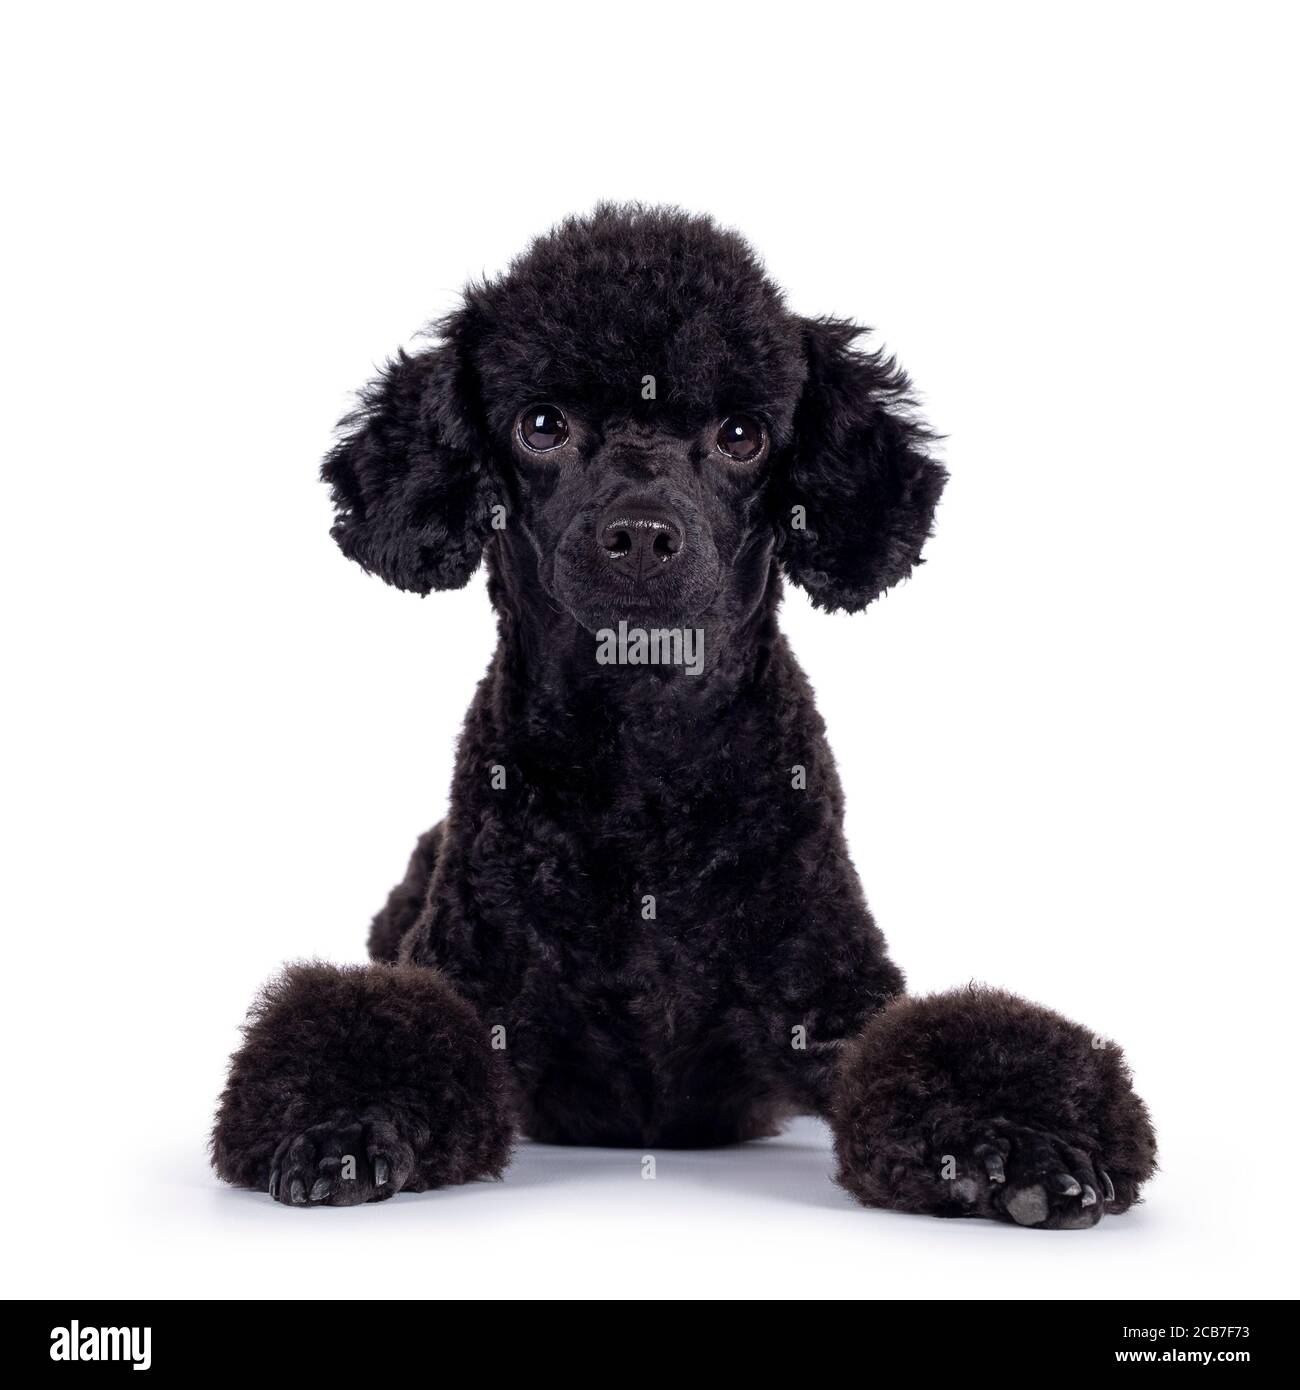 Cute black miniature poodle dog, laying down facing front. Looking straight to camera. Isolated on white background. Stock Photo